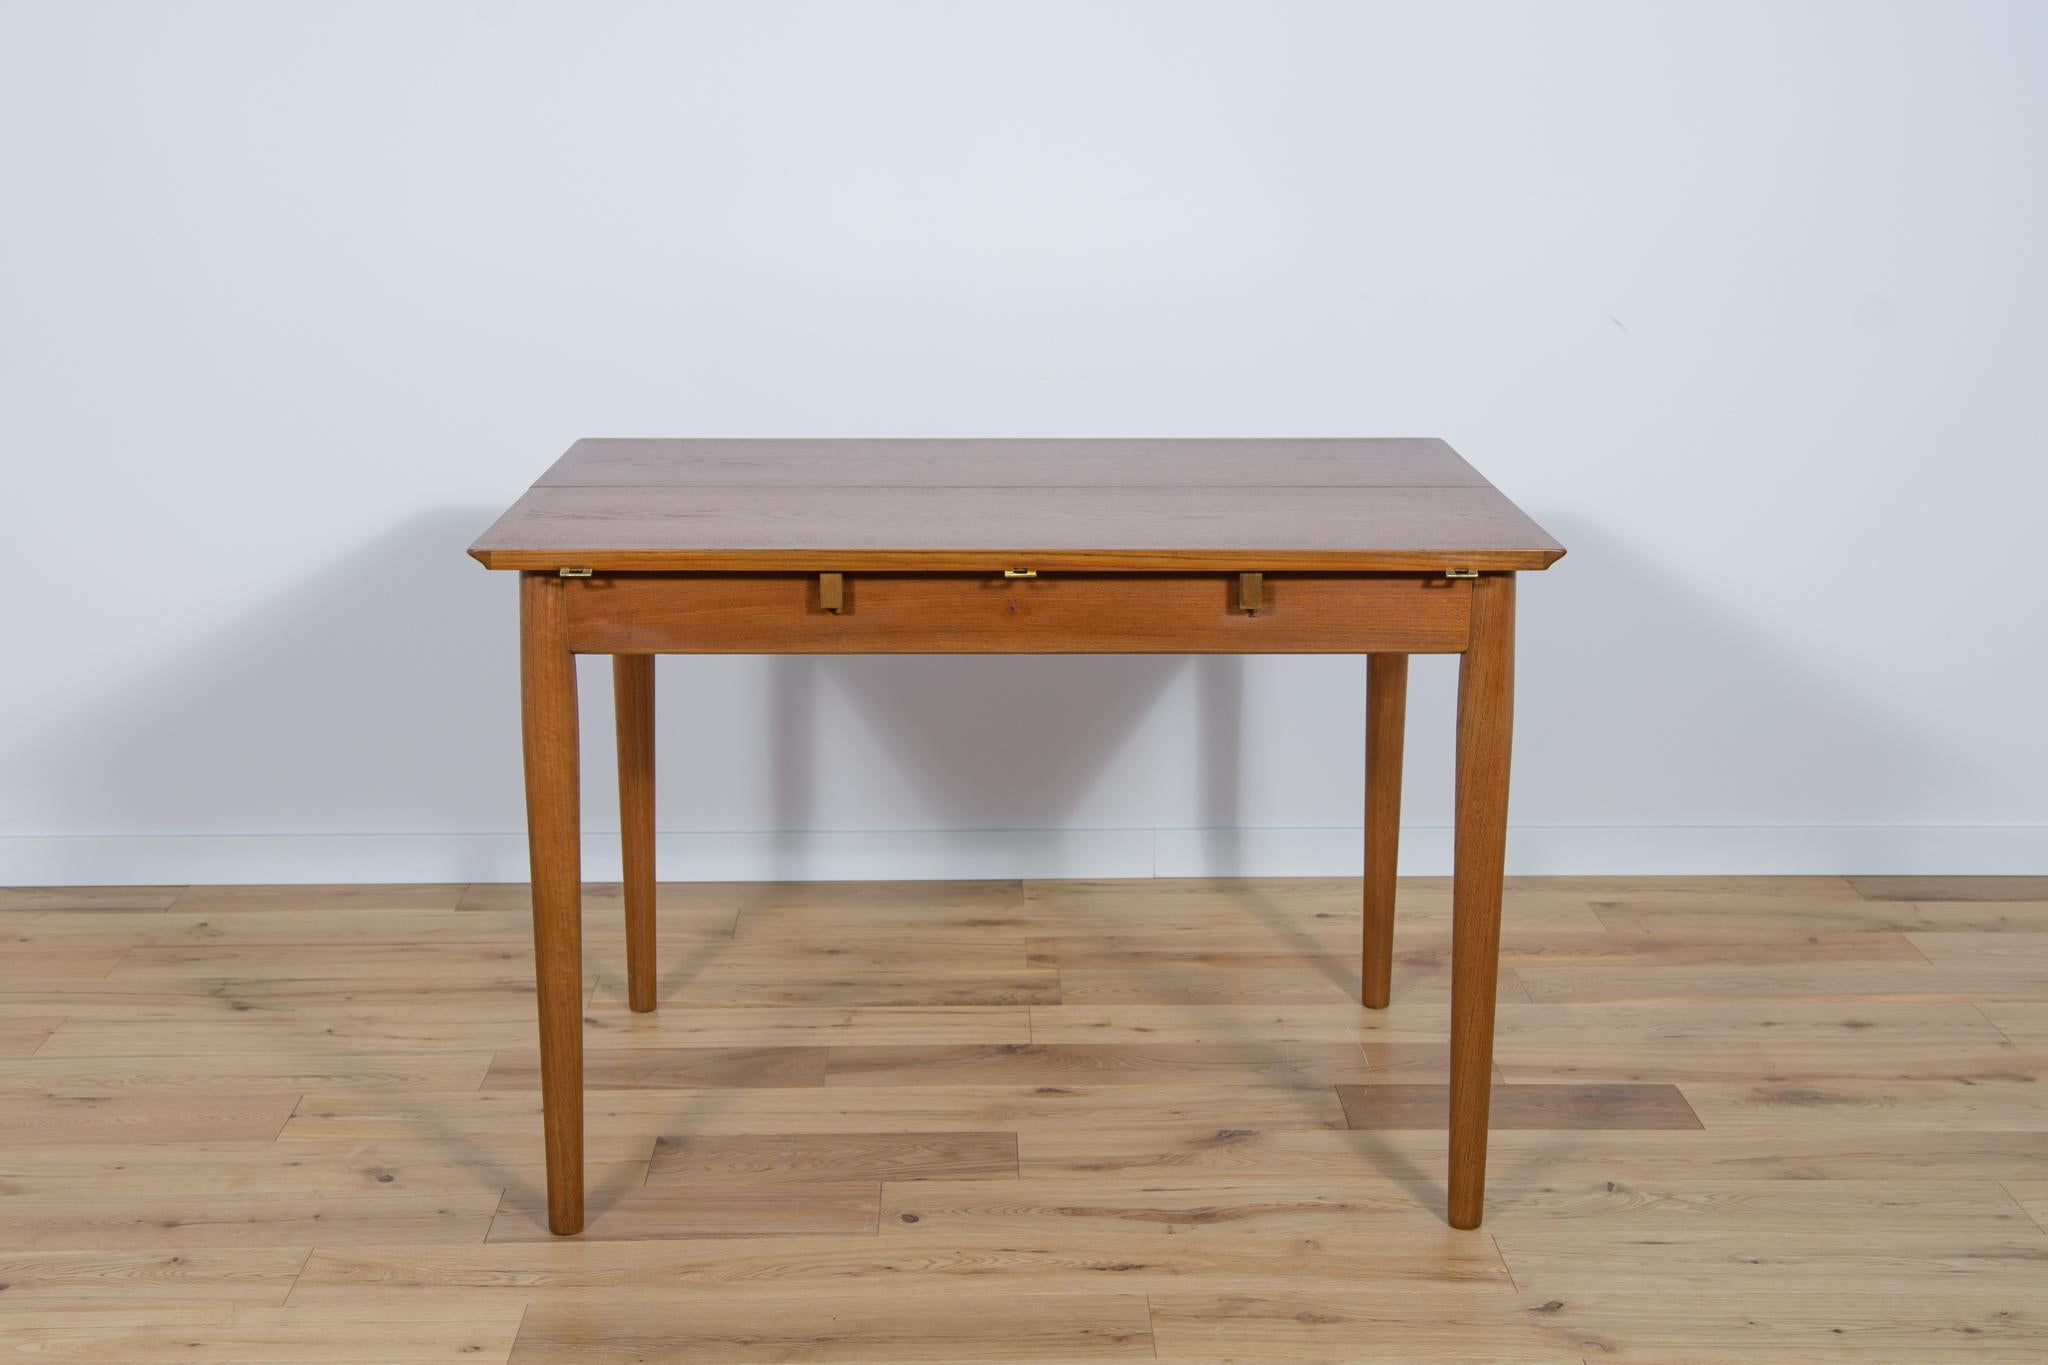 
The square extendable table made of teak wood was produced in Denmark in the 1960s. The table has profiled reinforced edges, giving it elegance. The table is after a comprehensive carpentry renovation, cleaned of the old coating, stained with oak